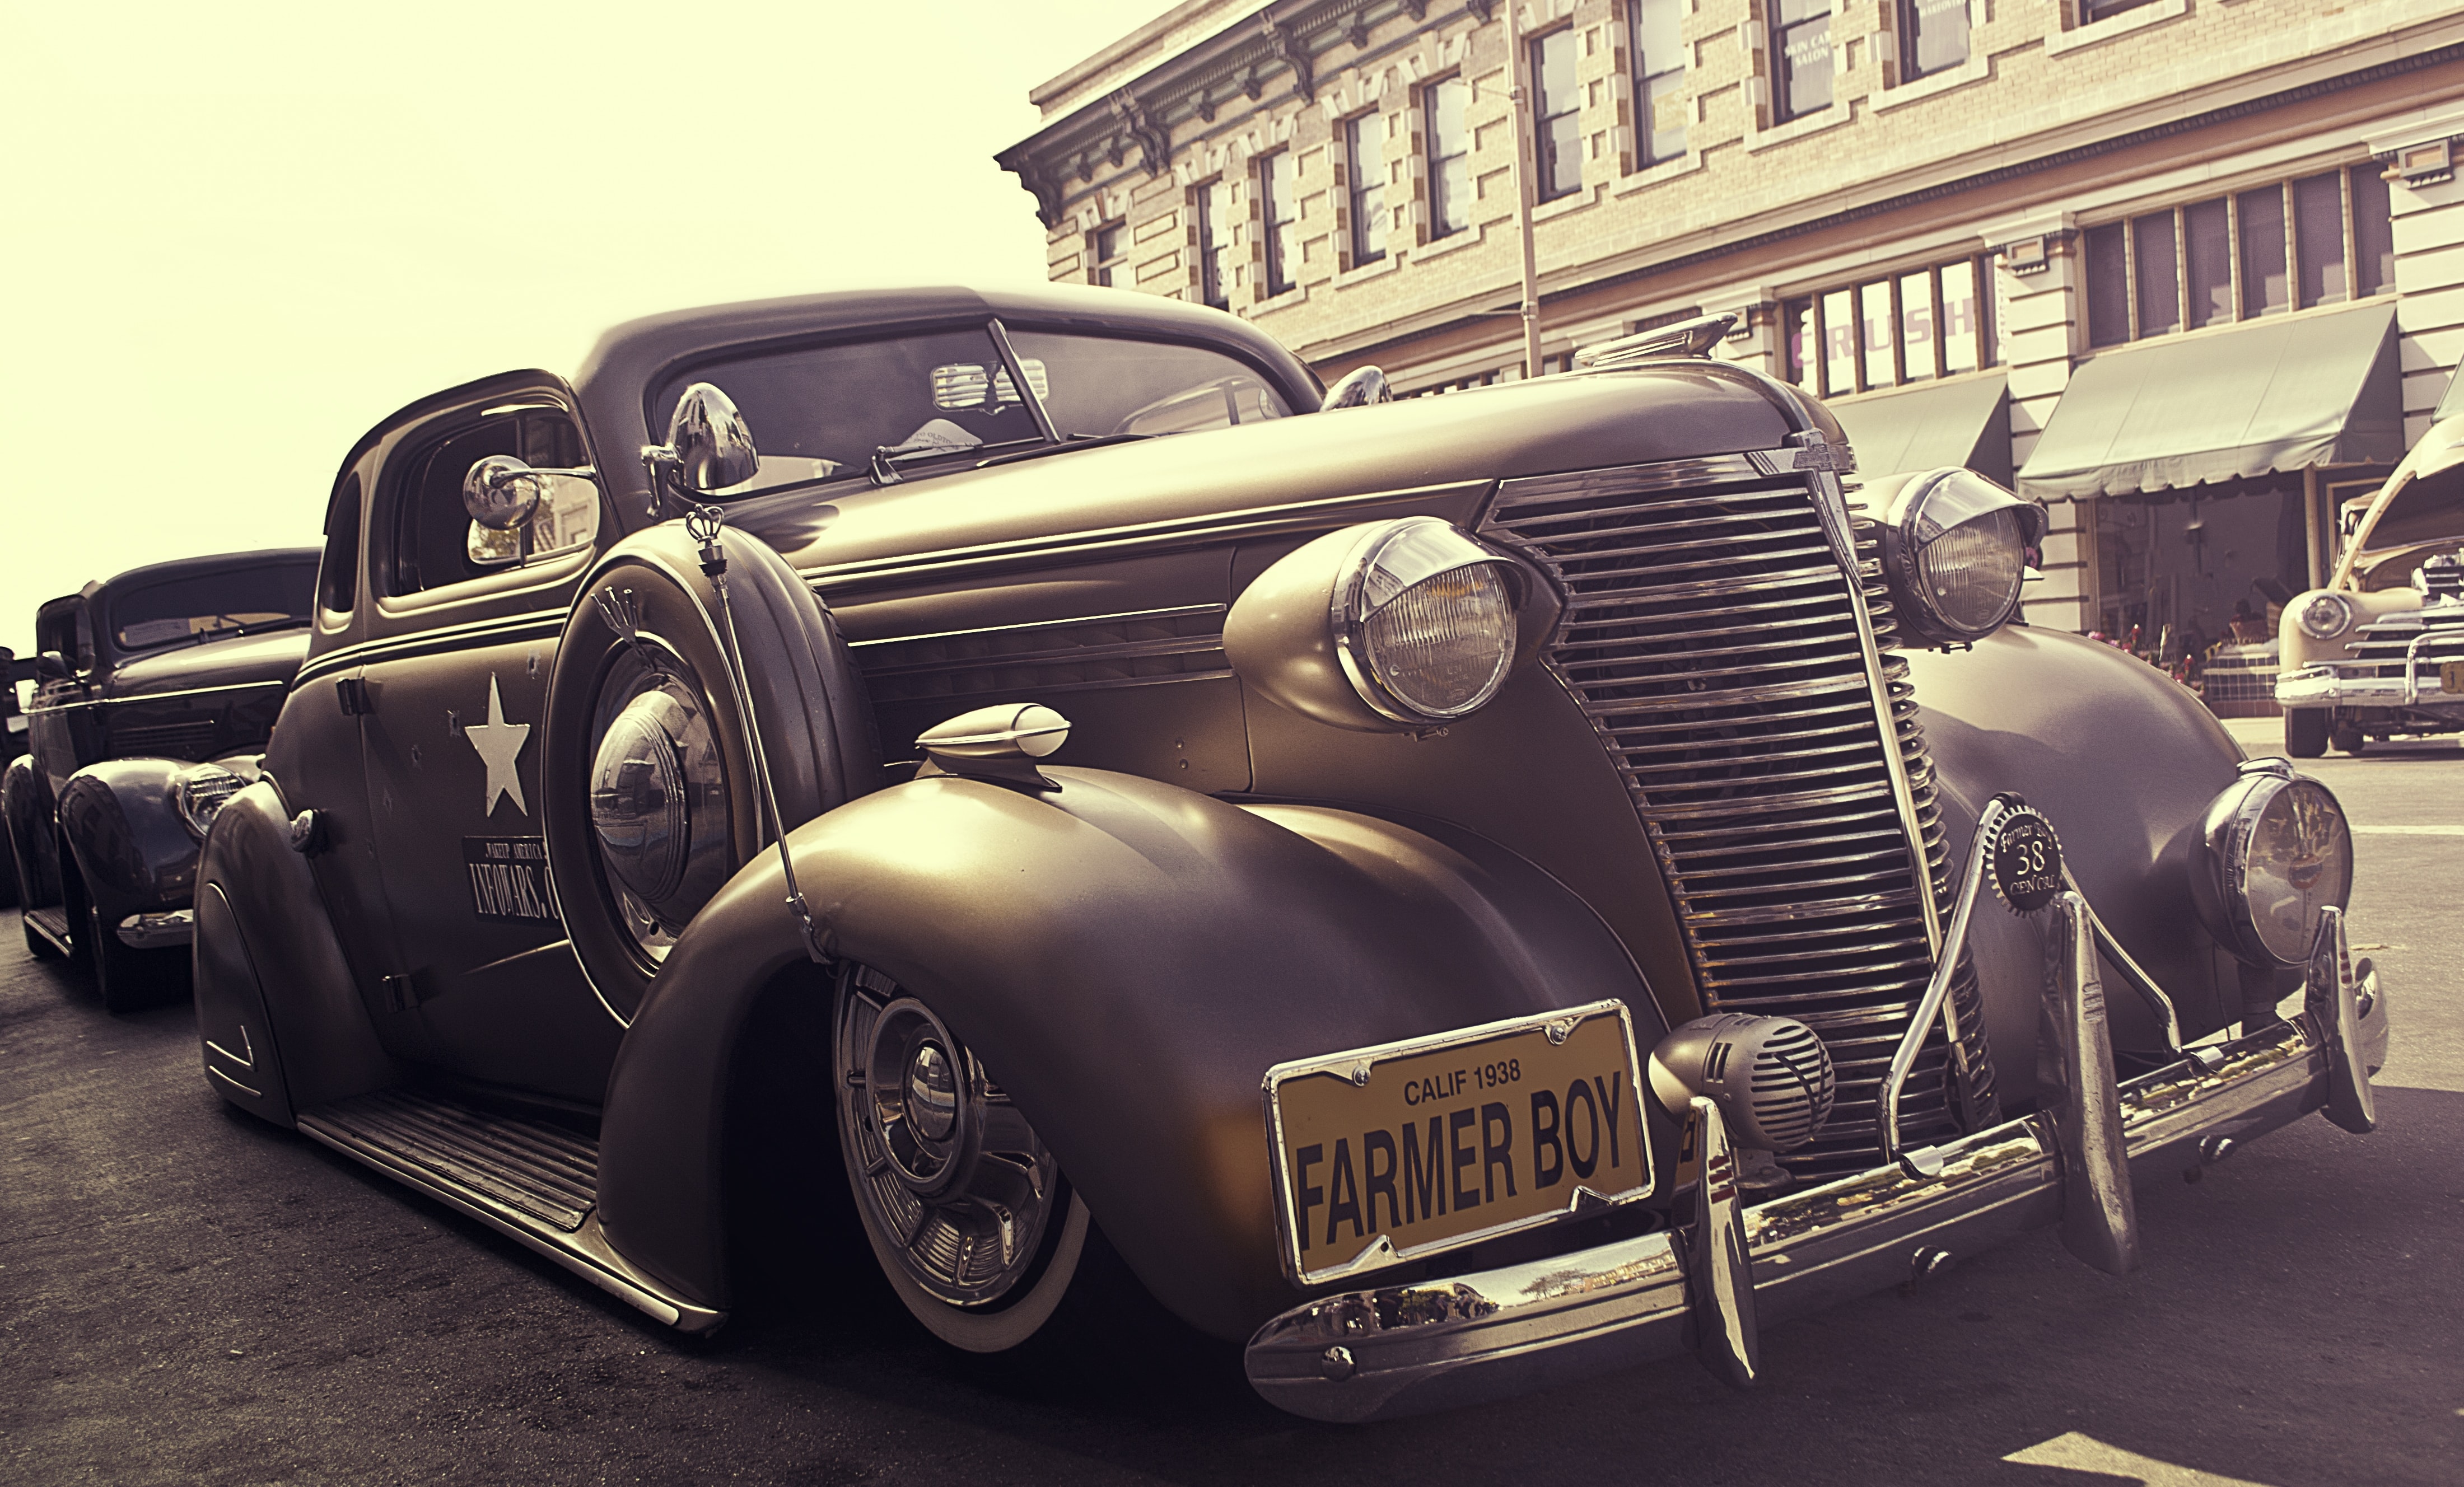 General 4400x2656 car vehicle classic car photography